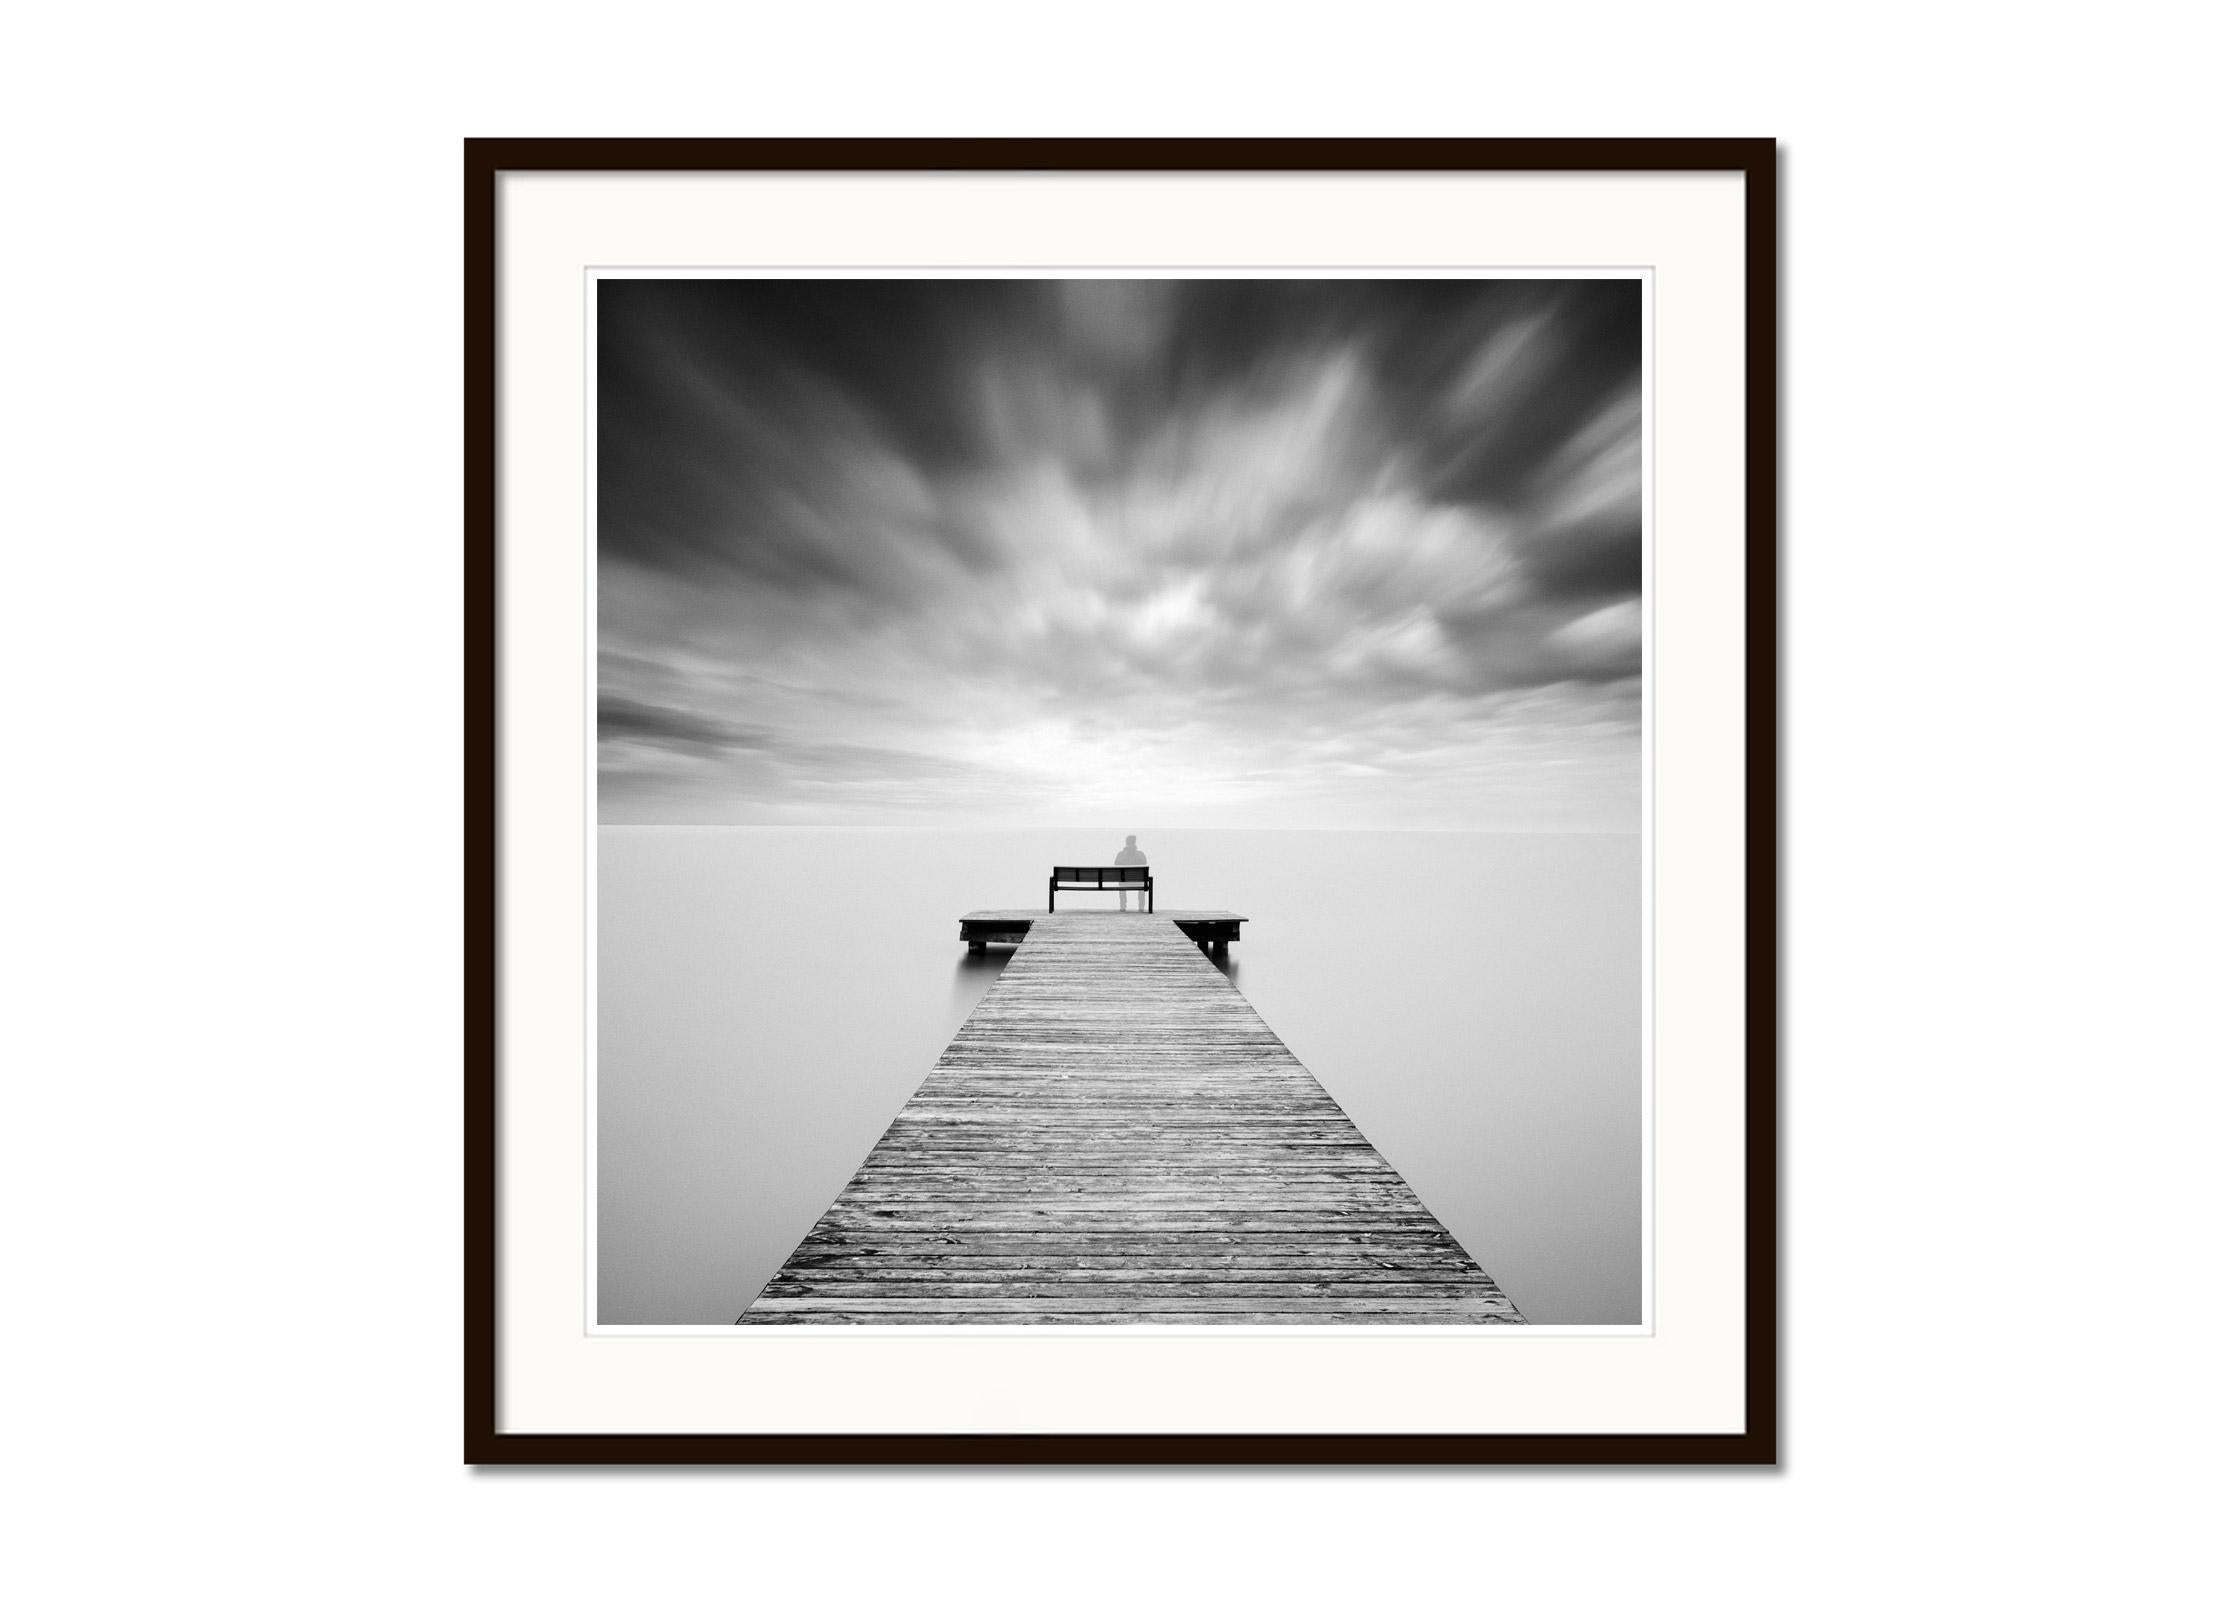 Self Portrait, lake, storm, black and white long exposure waterscape photography - Gray Landscape Photograph by Gerald Berghammer